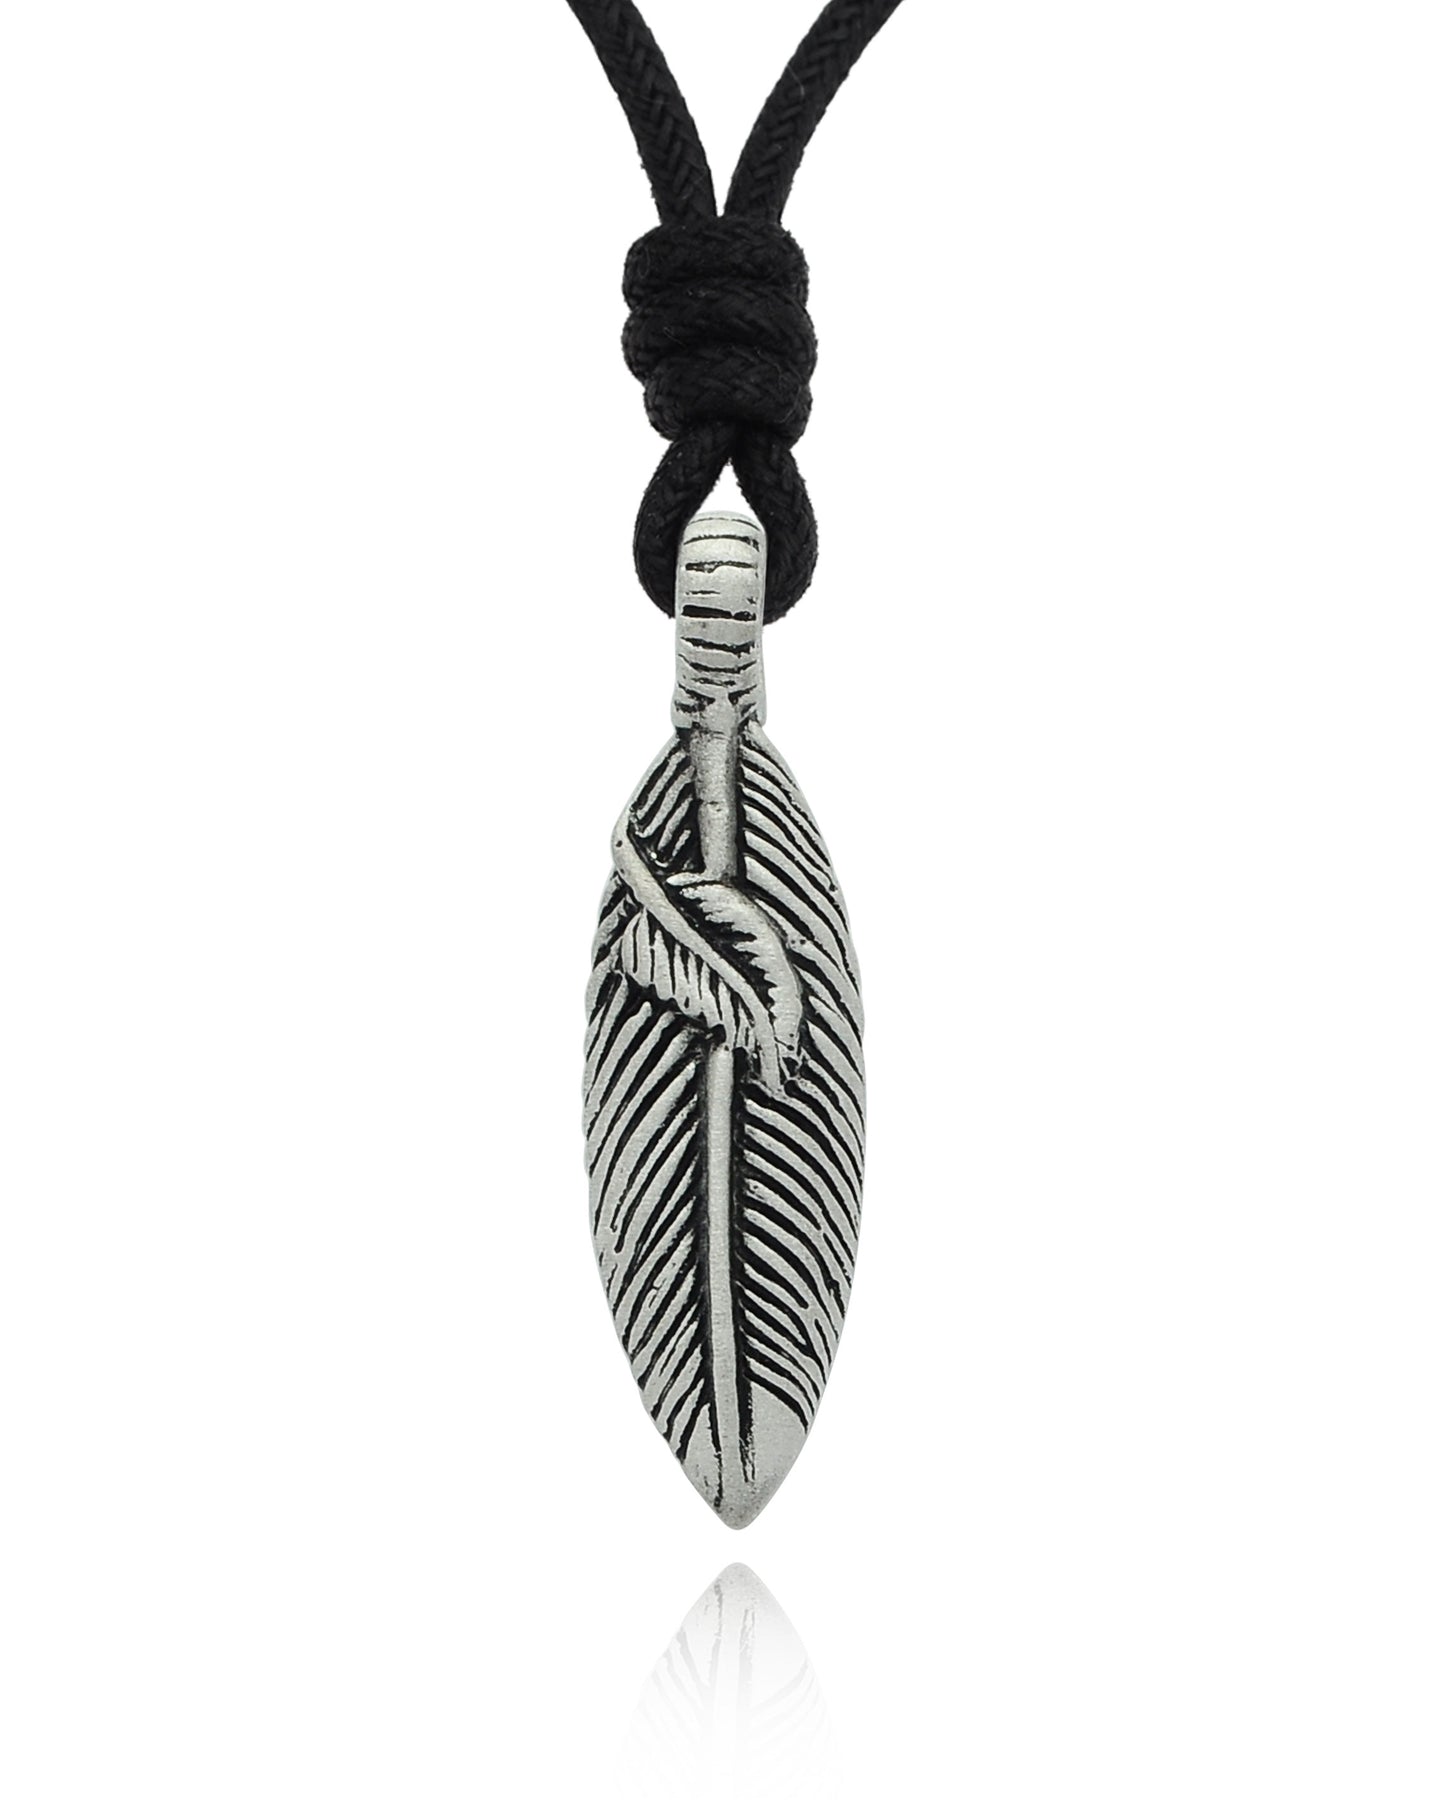 Stylish Indian Feather Silver Pewter Charm Necklace Pendant Jewelry